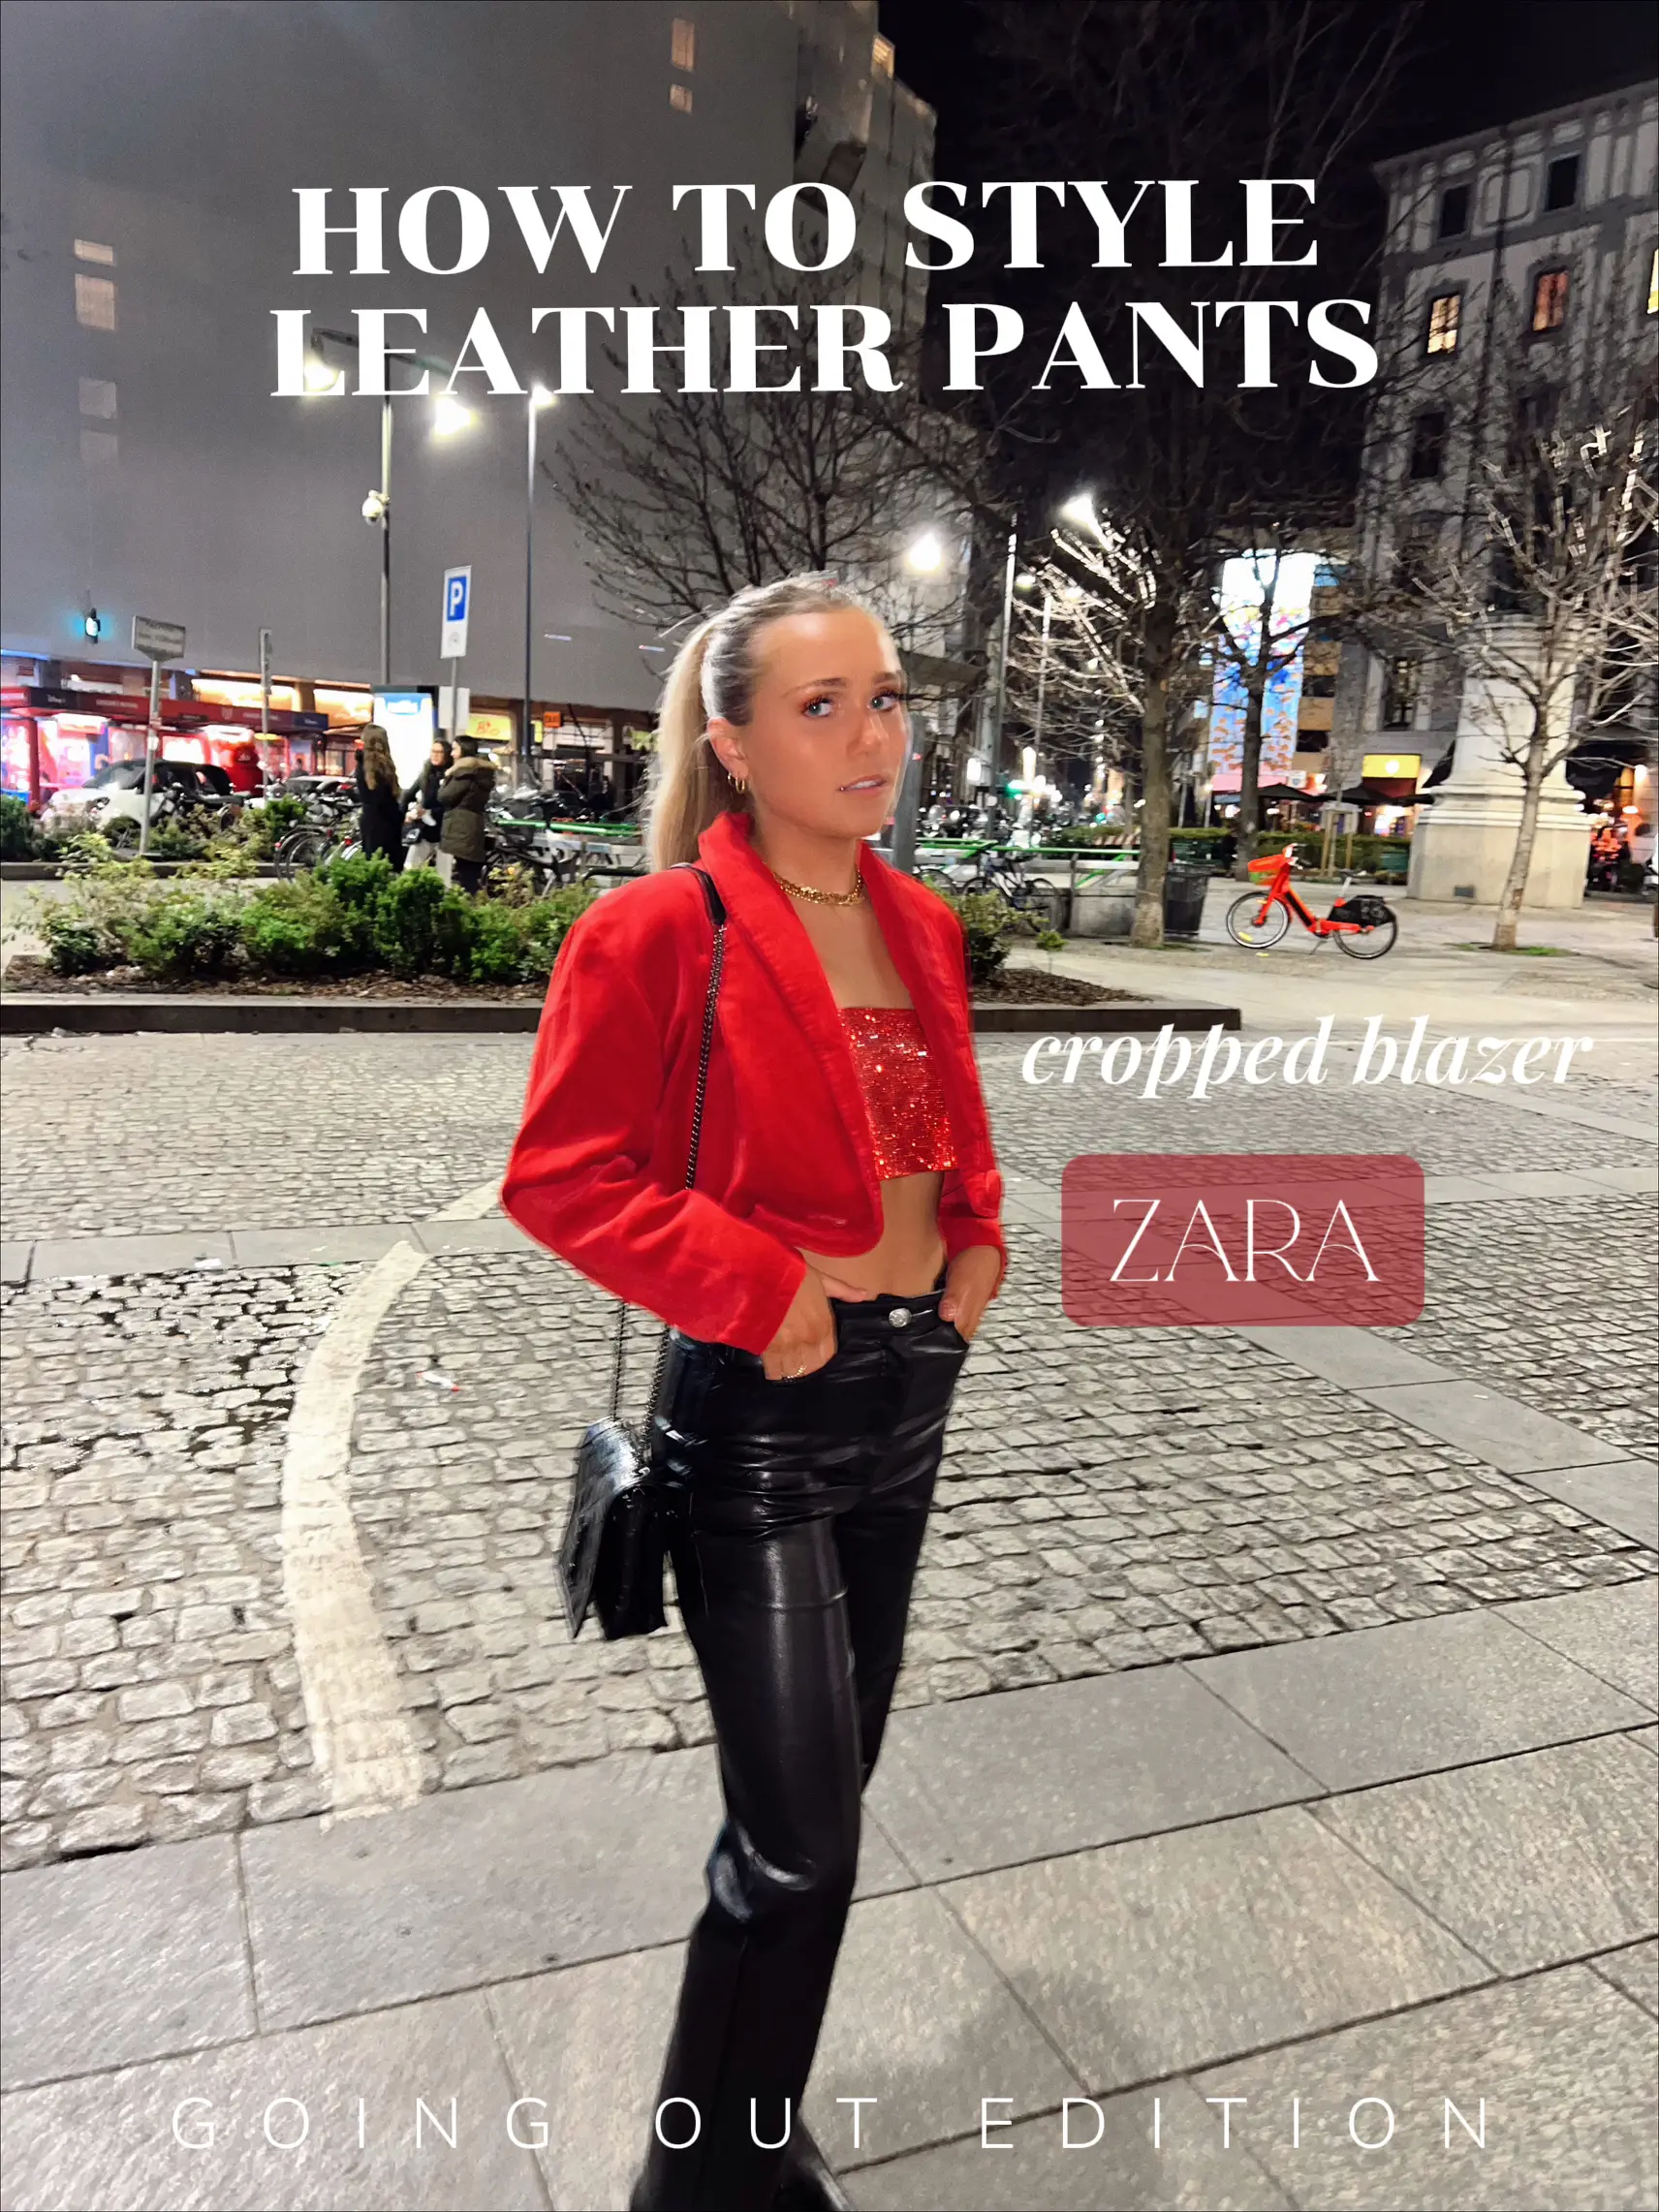 How to style leather pants✨, Gallery posted by Kiersten Parkin